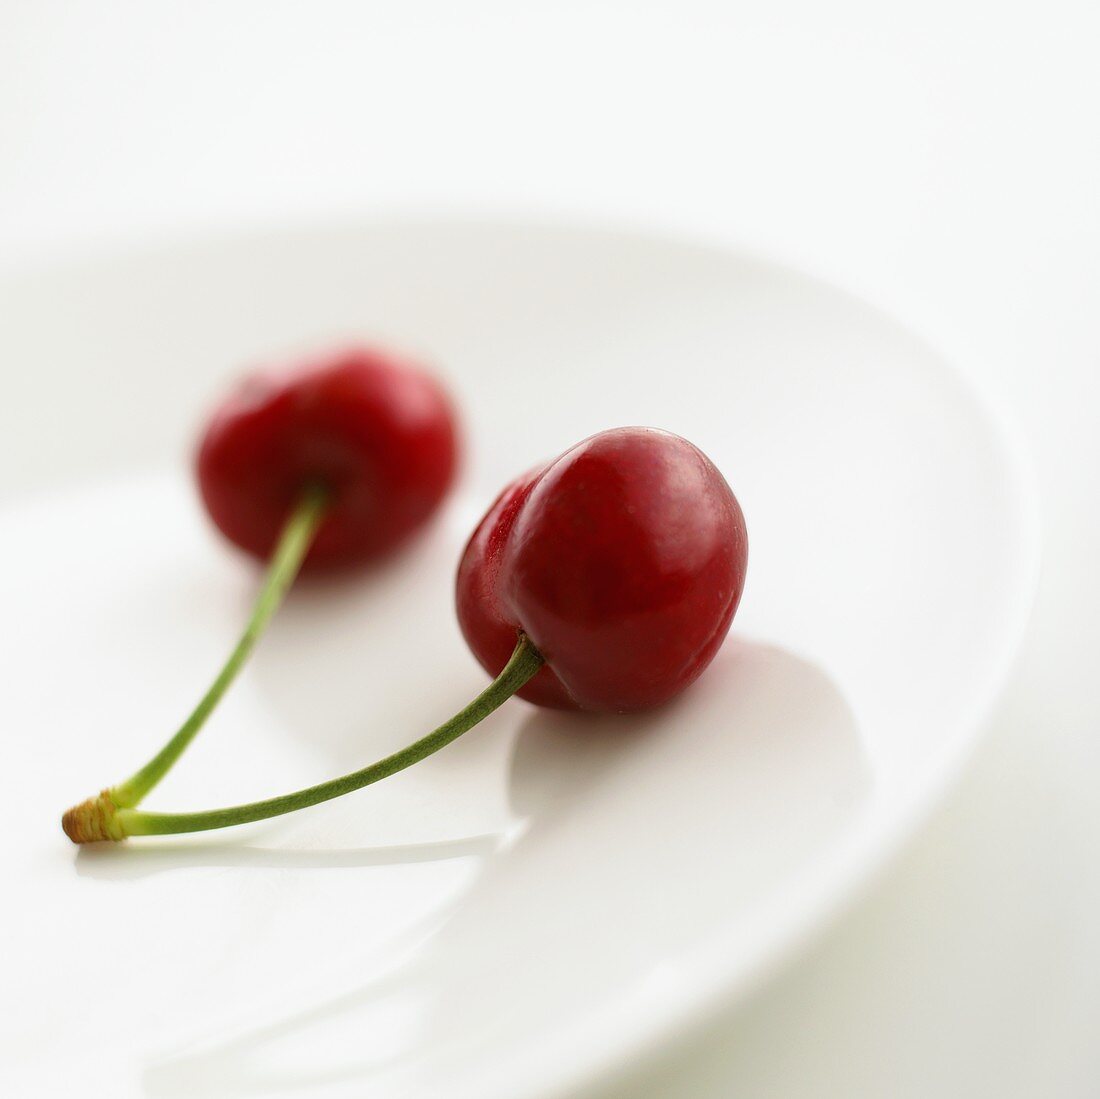 Two cherries on a plate